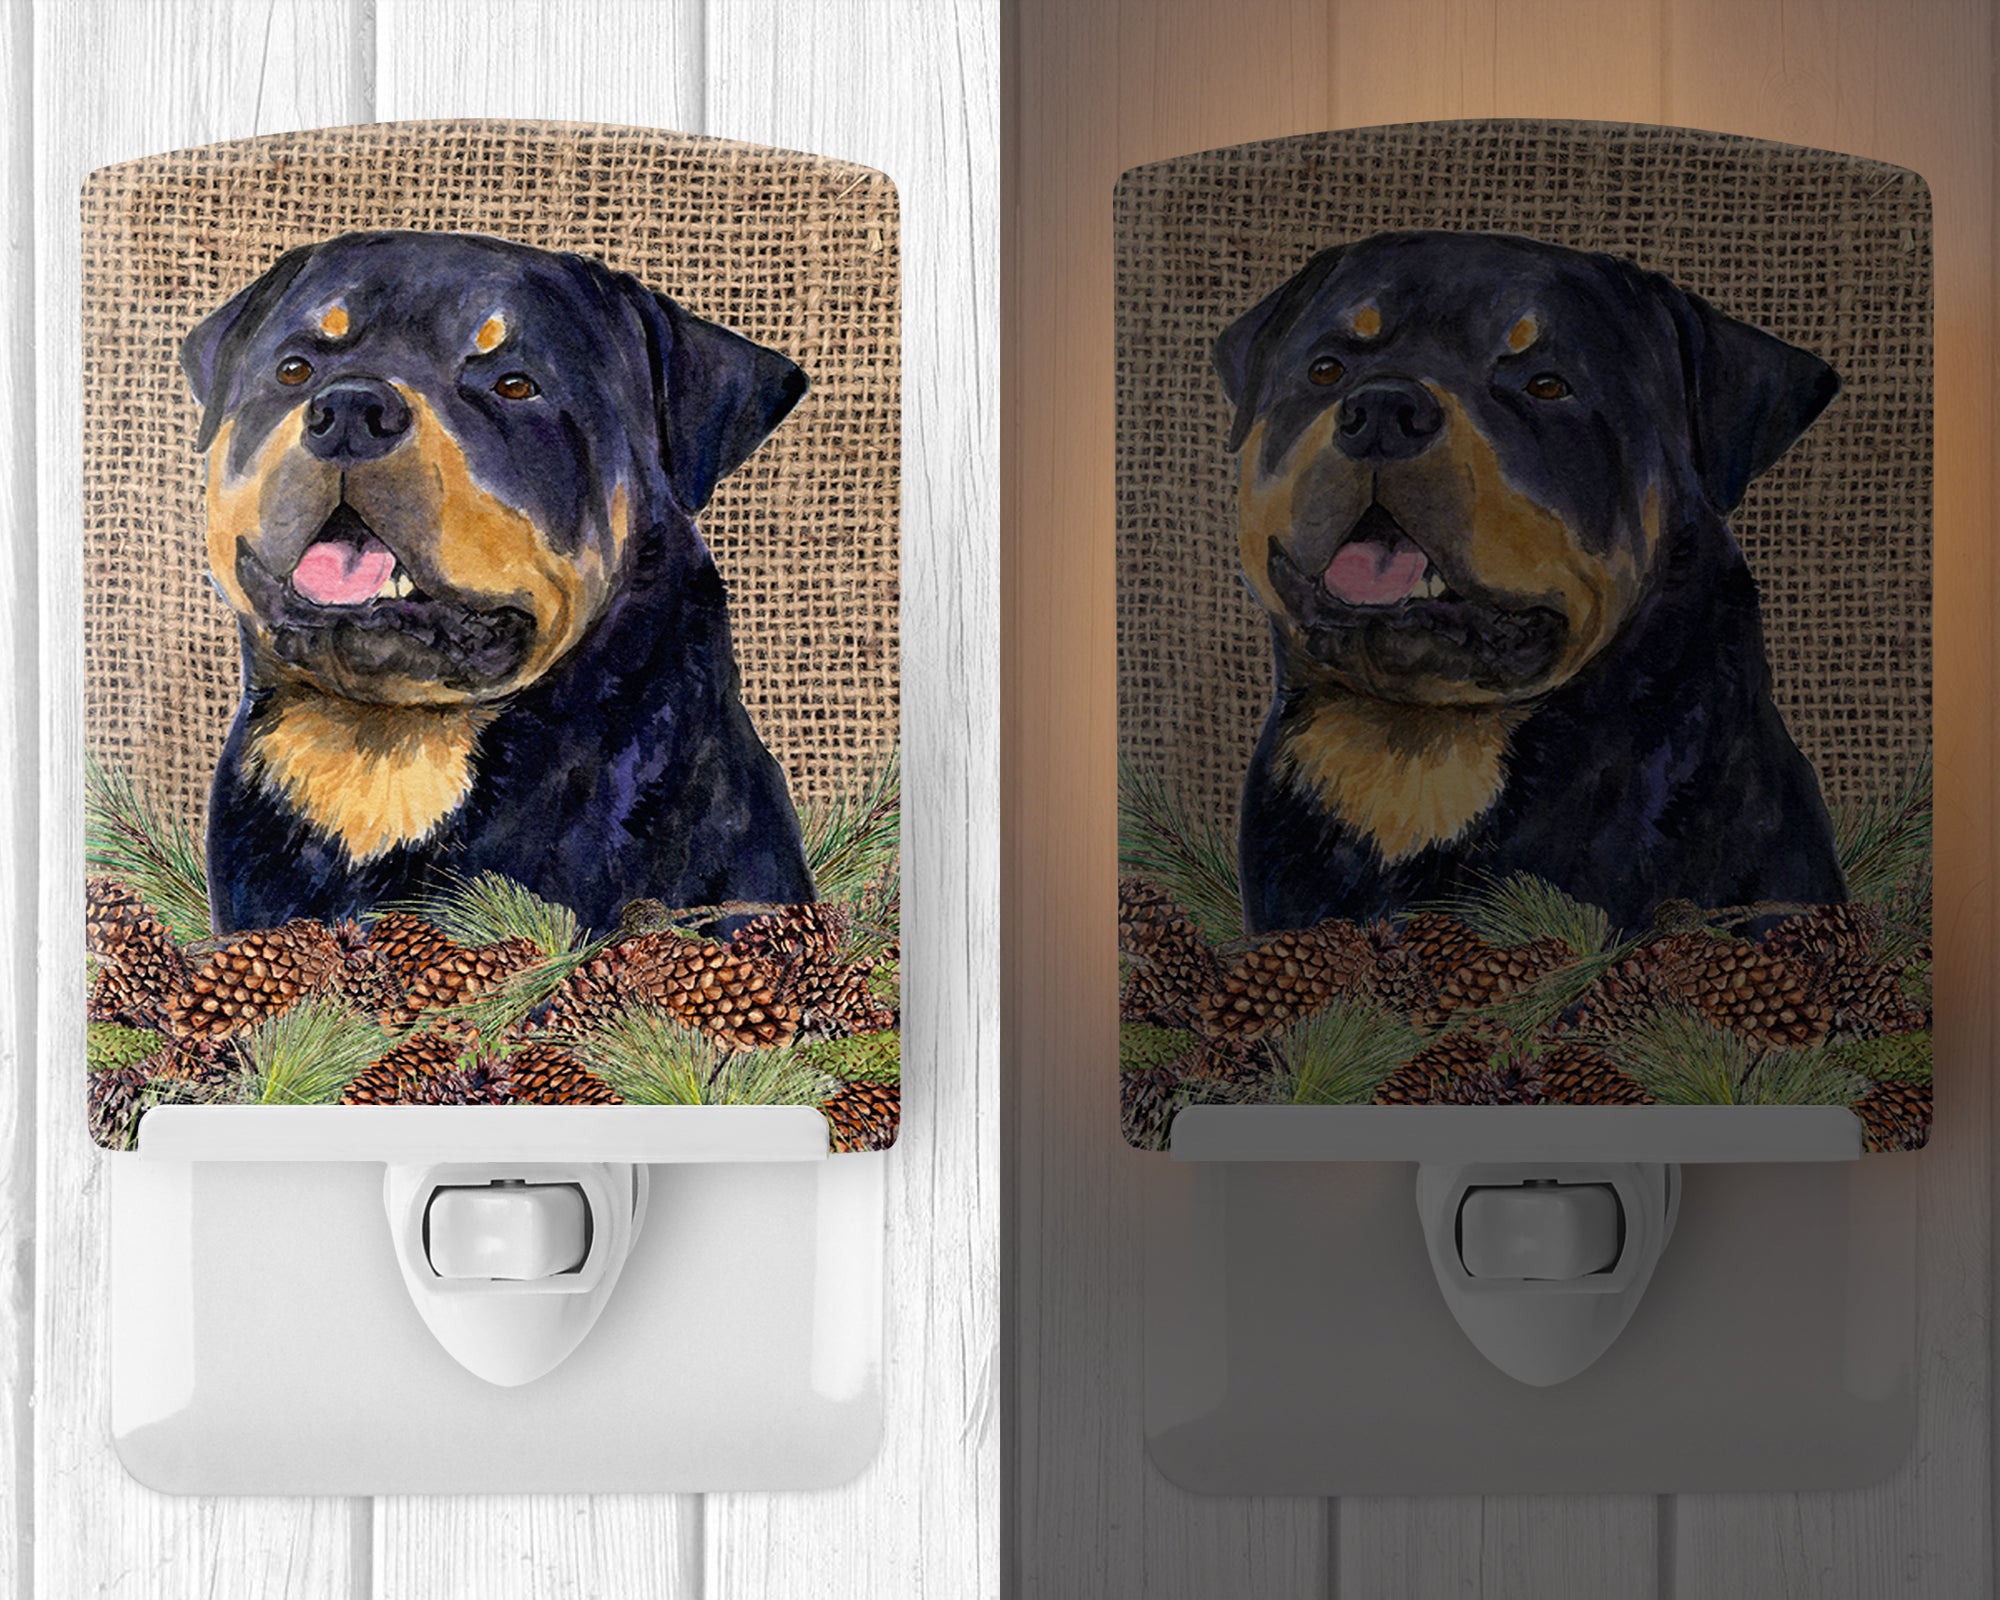 Rottweiler on Faux Burlap with Pine Cones Ceramic Night Light SS4059CNL - the-store.com